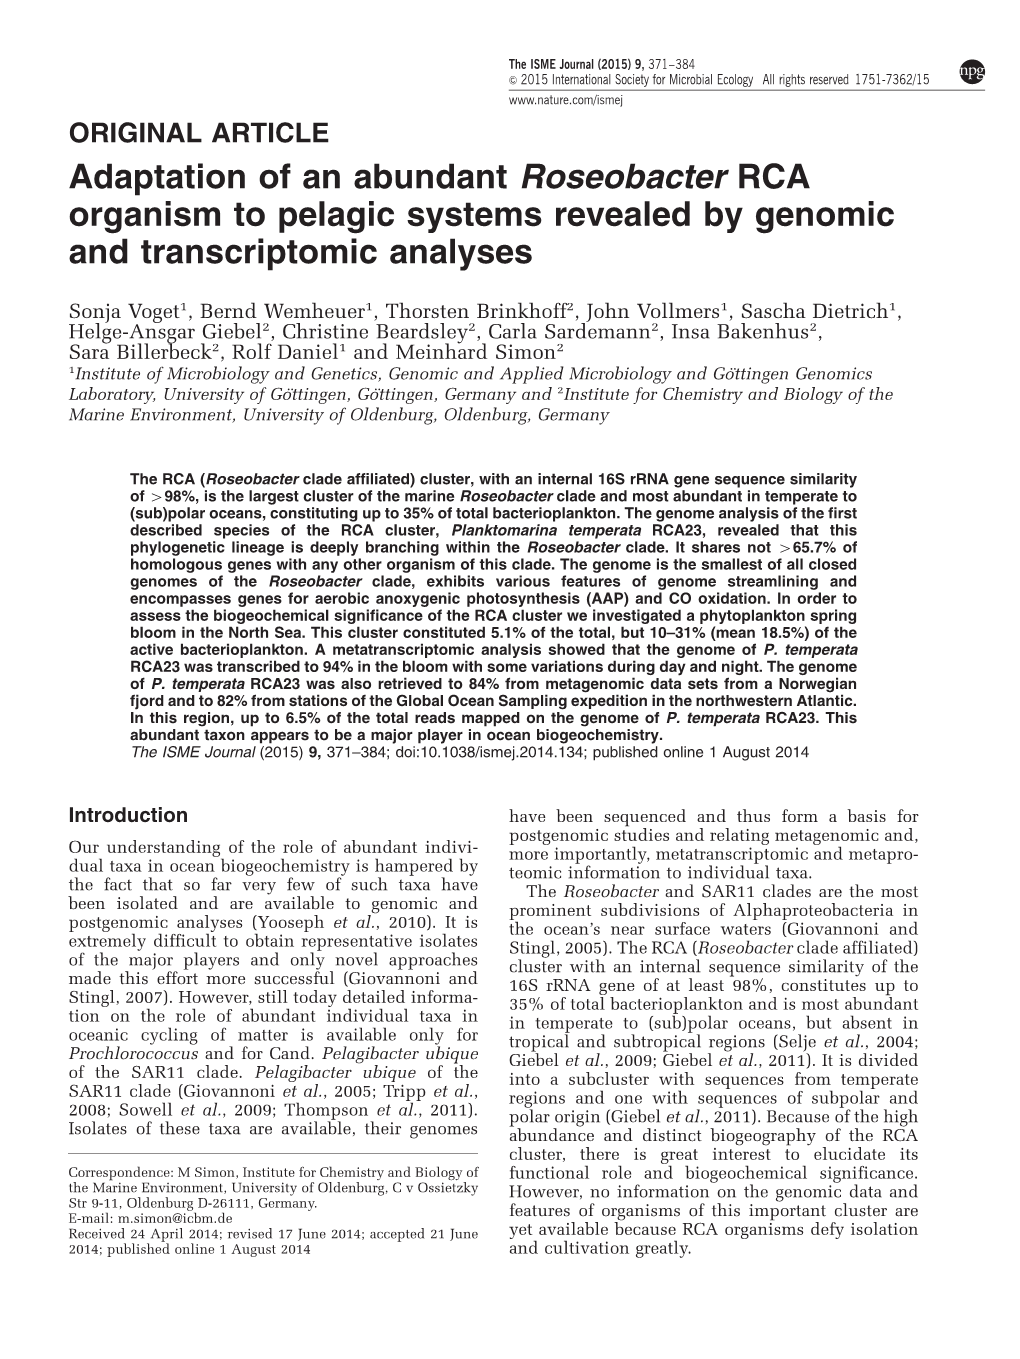 Adaptation of an Abundant Roseobacter RCA Organism to Pelagic Systems Revealed by Genomic and Transcriptomic Analyses